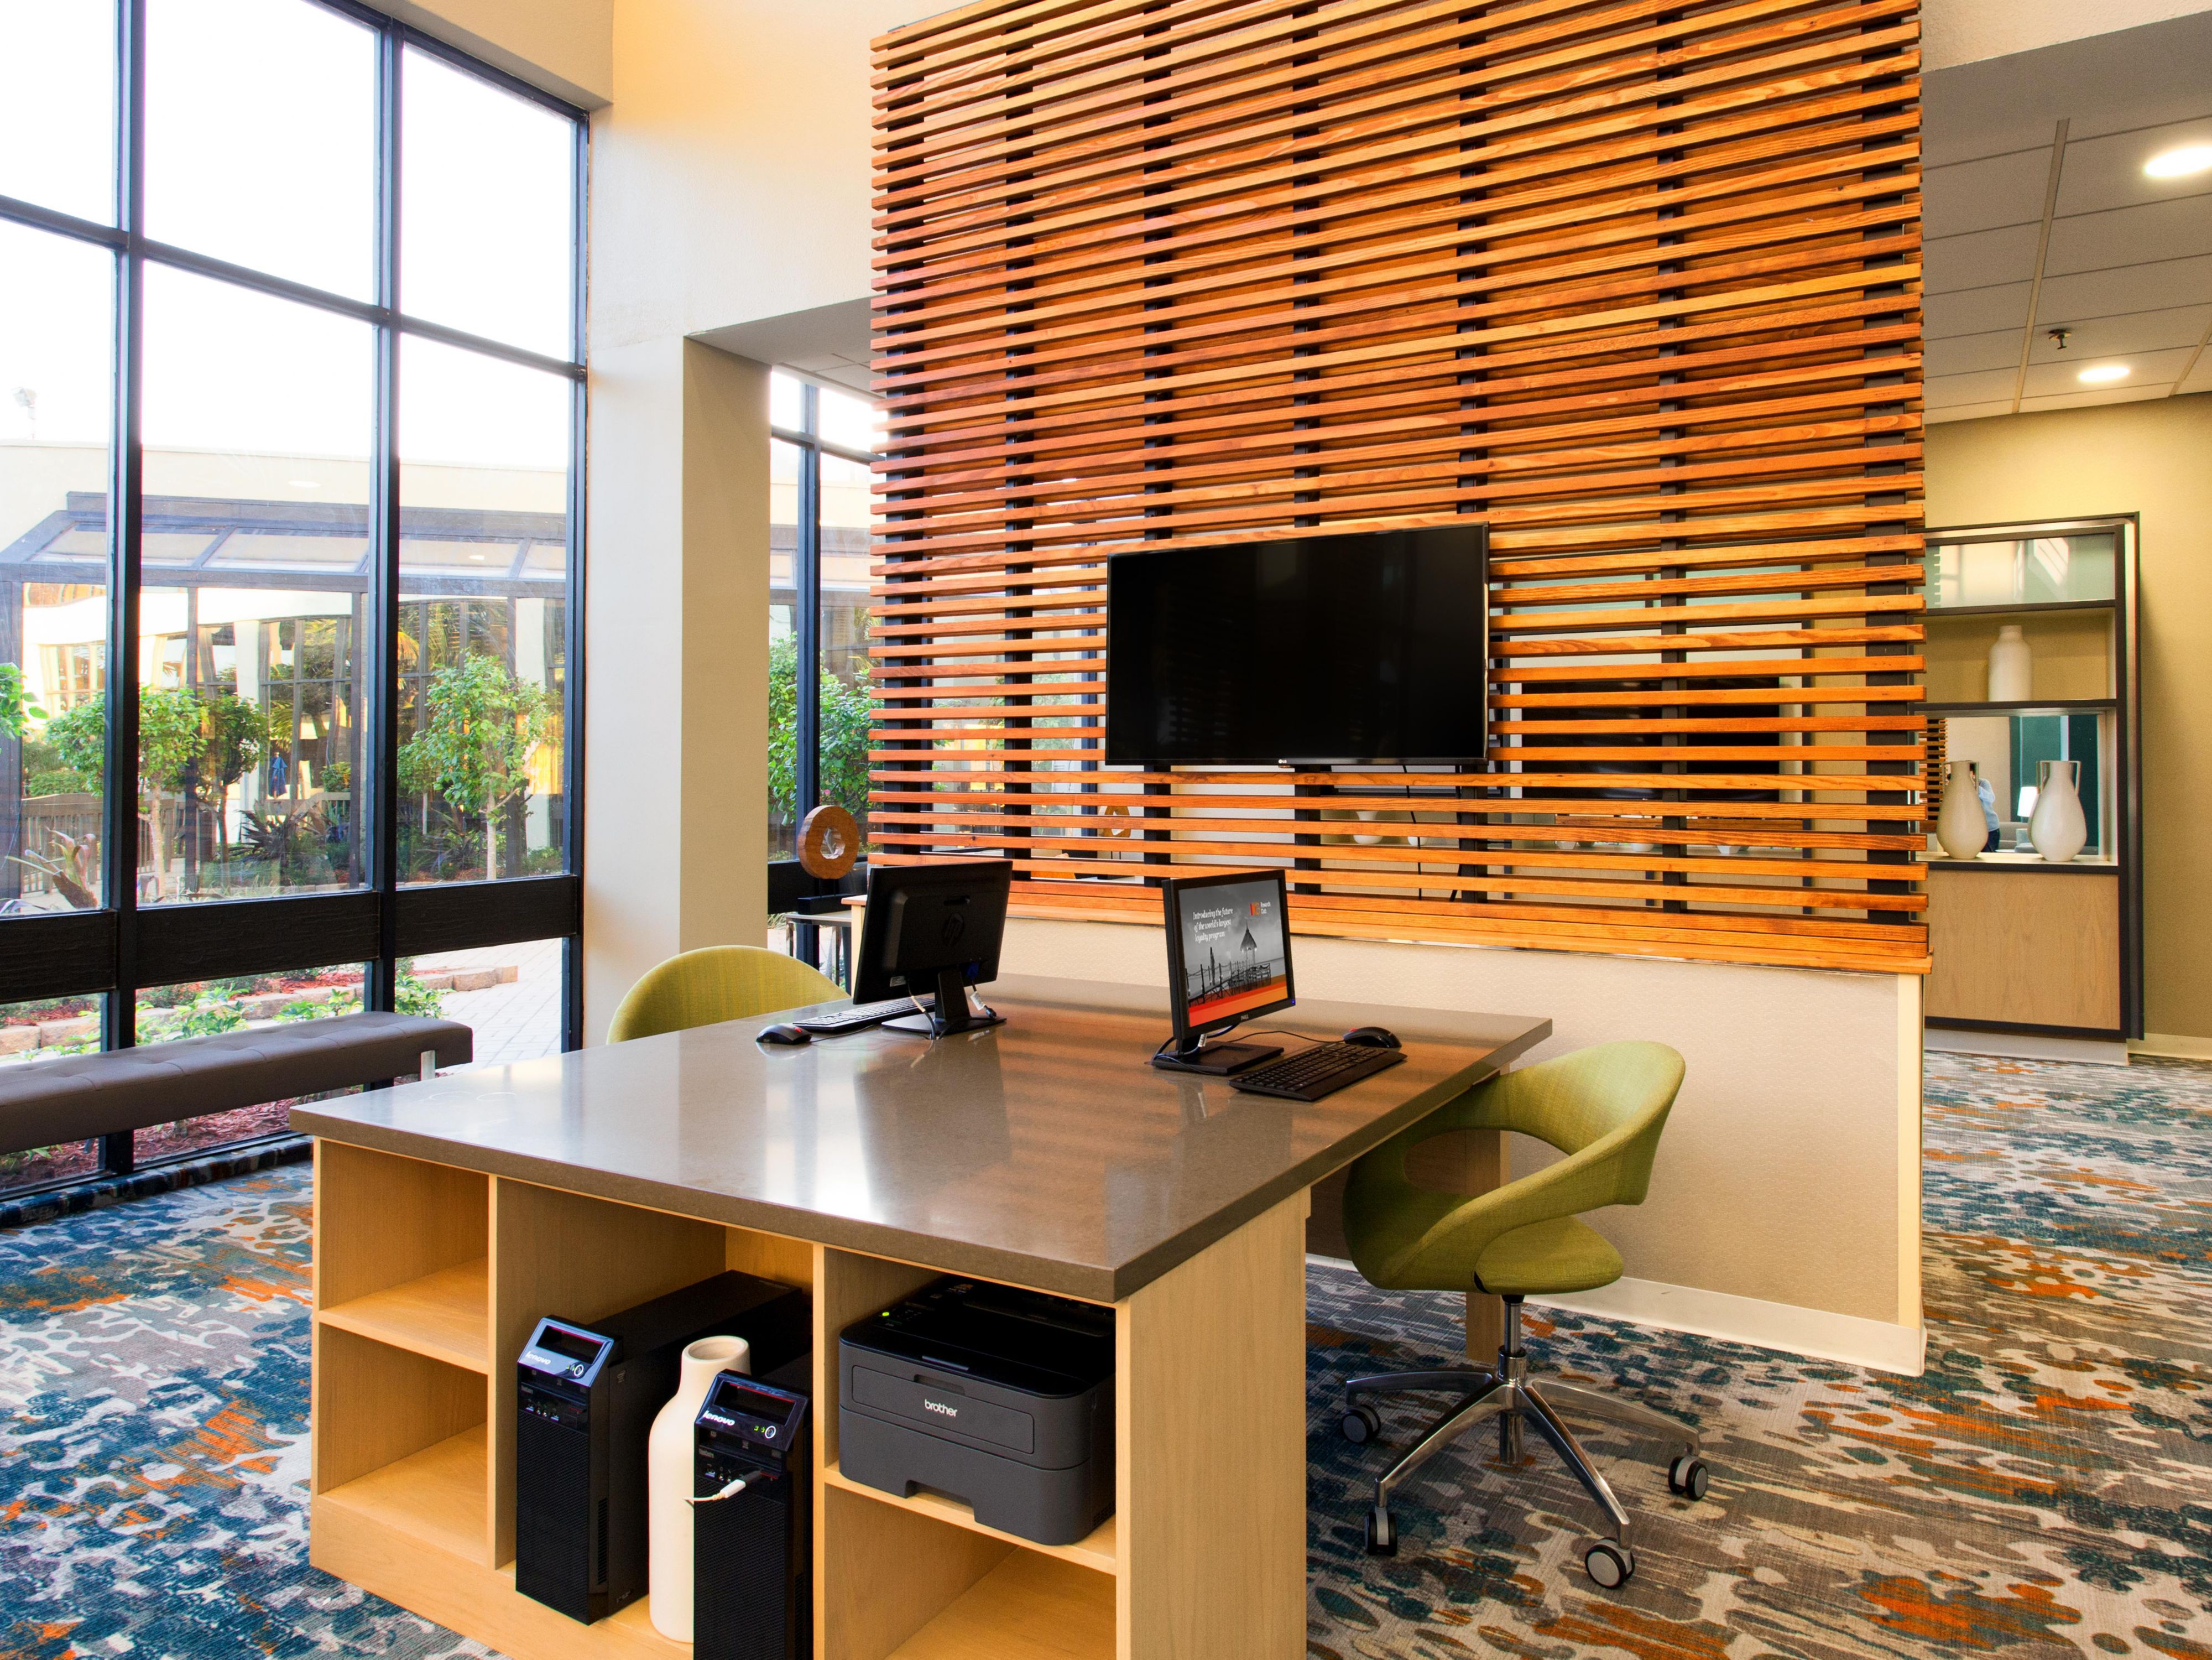 Visit our on-site Business Center, open 24 hours a day. Enjoy access to our computers, a printer, scanner and office supplies. Don't forget that standard wireless hi-speed internet service is free for all IHG® Rewards Club members!